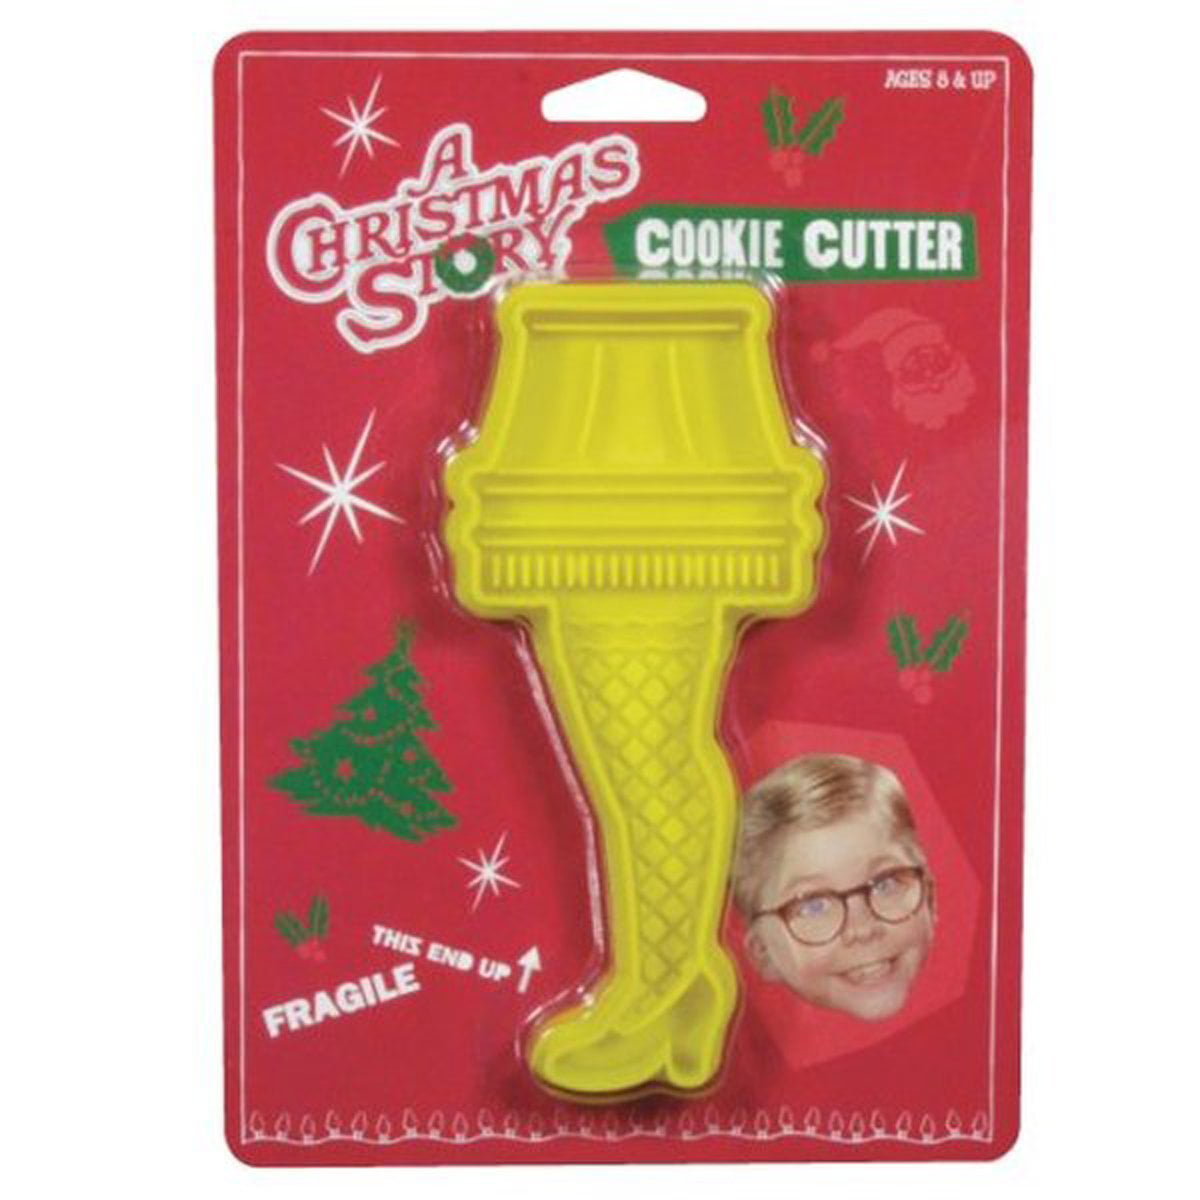 iCup a Christmas Story Leg Lamp Cookie Cutter 09579 for sale online 